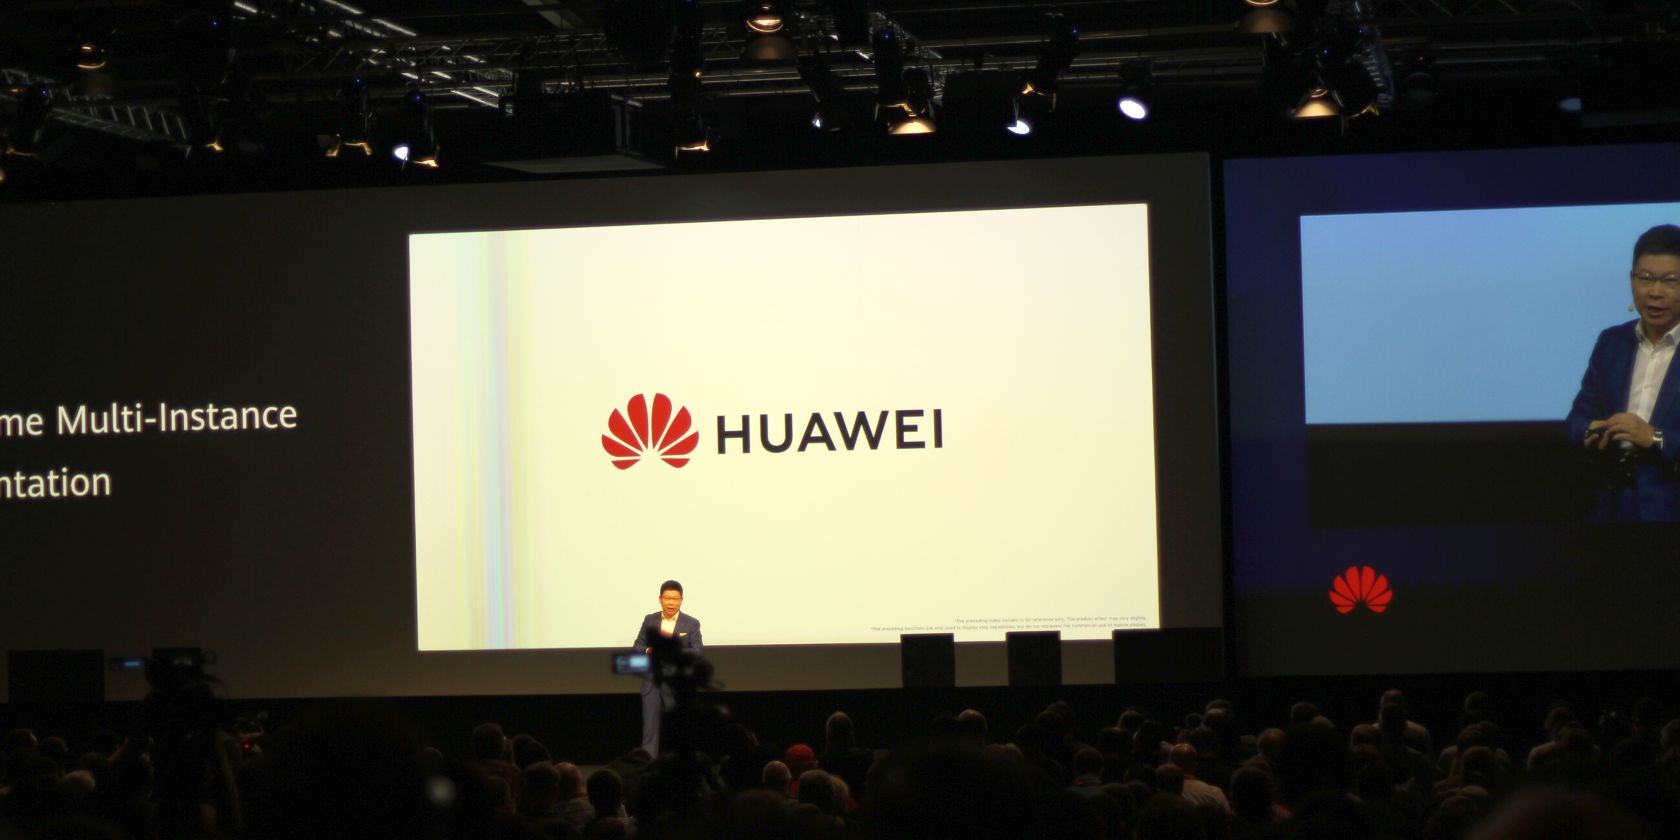 This is an image of Huawei's logo which was displayed at IFA 2019 during a keynote speech